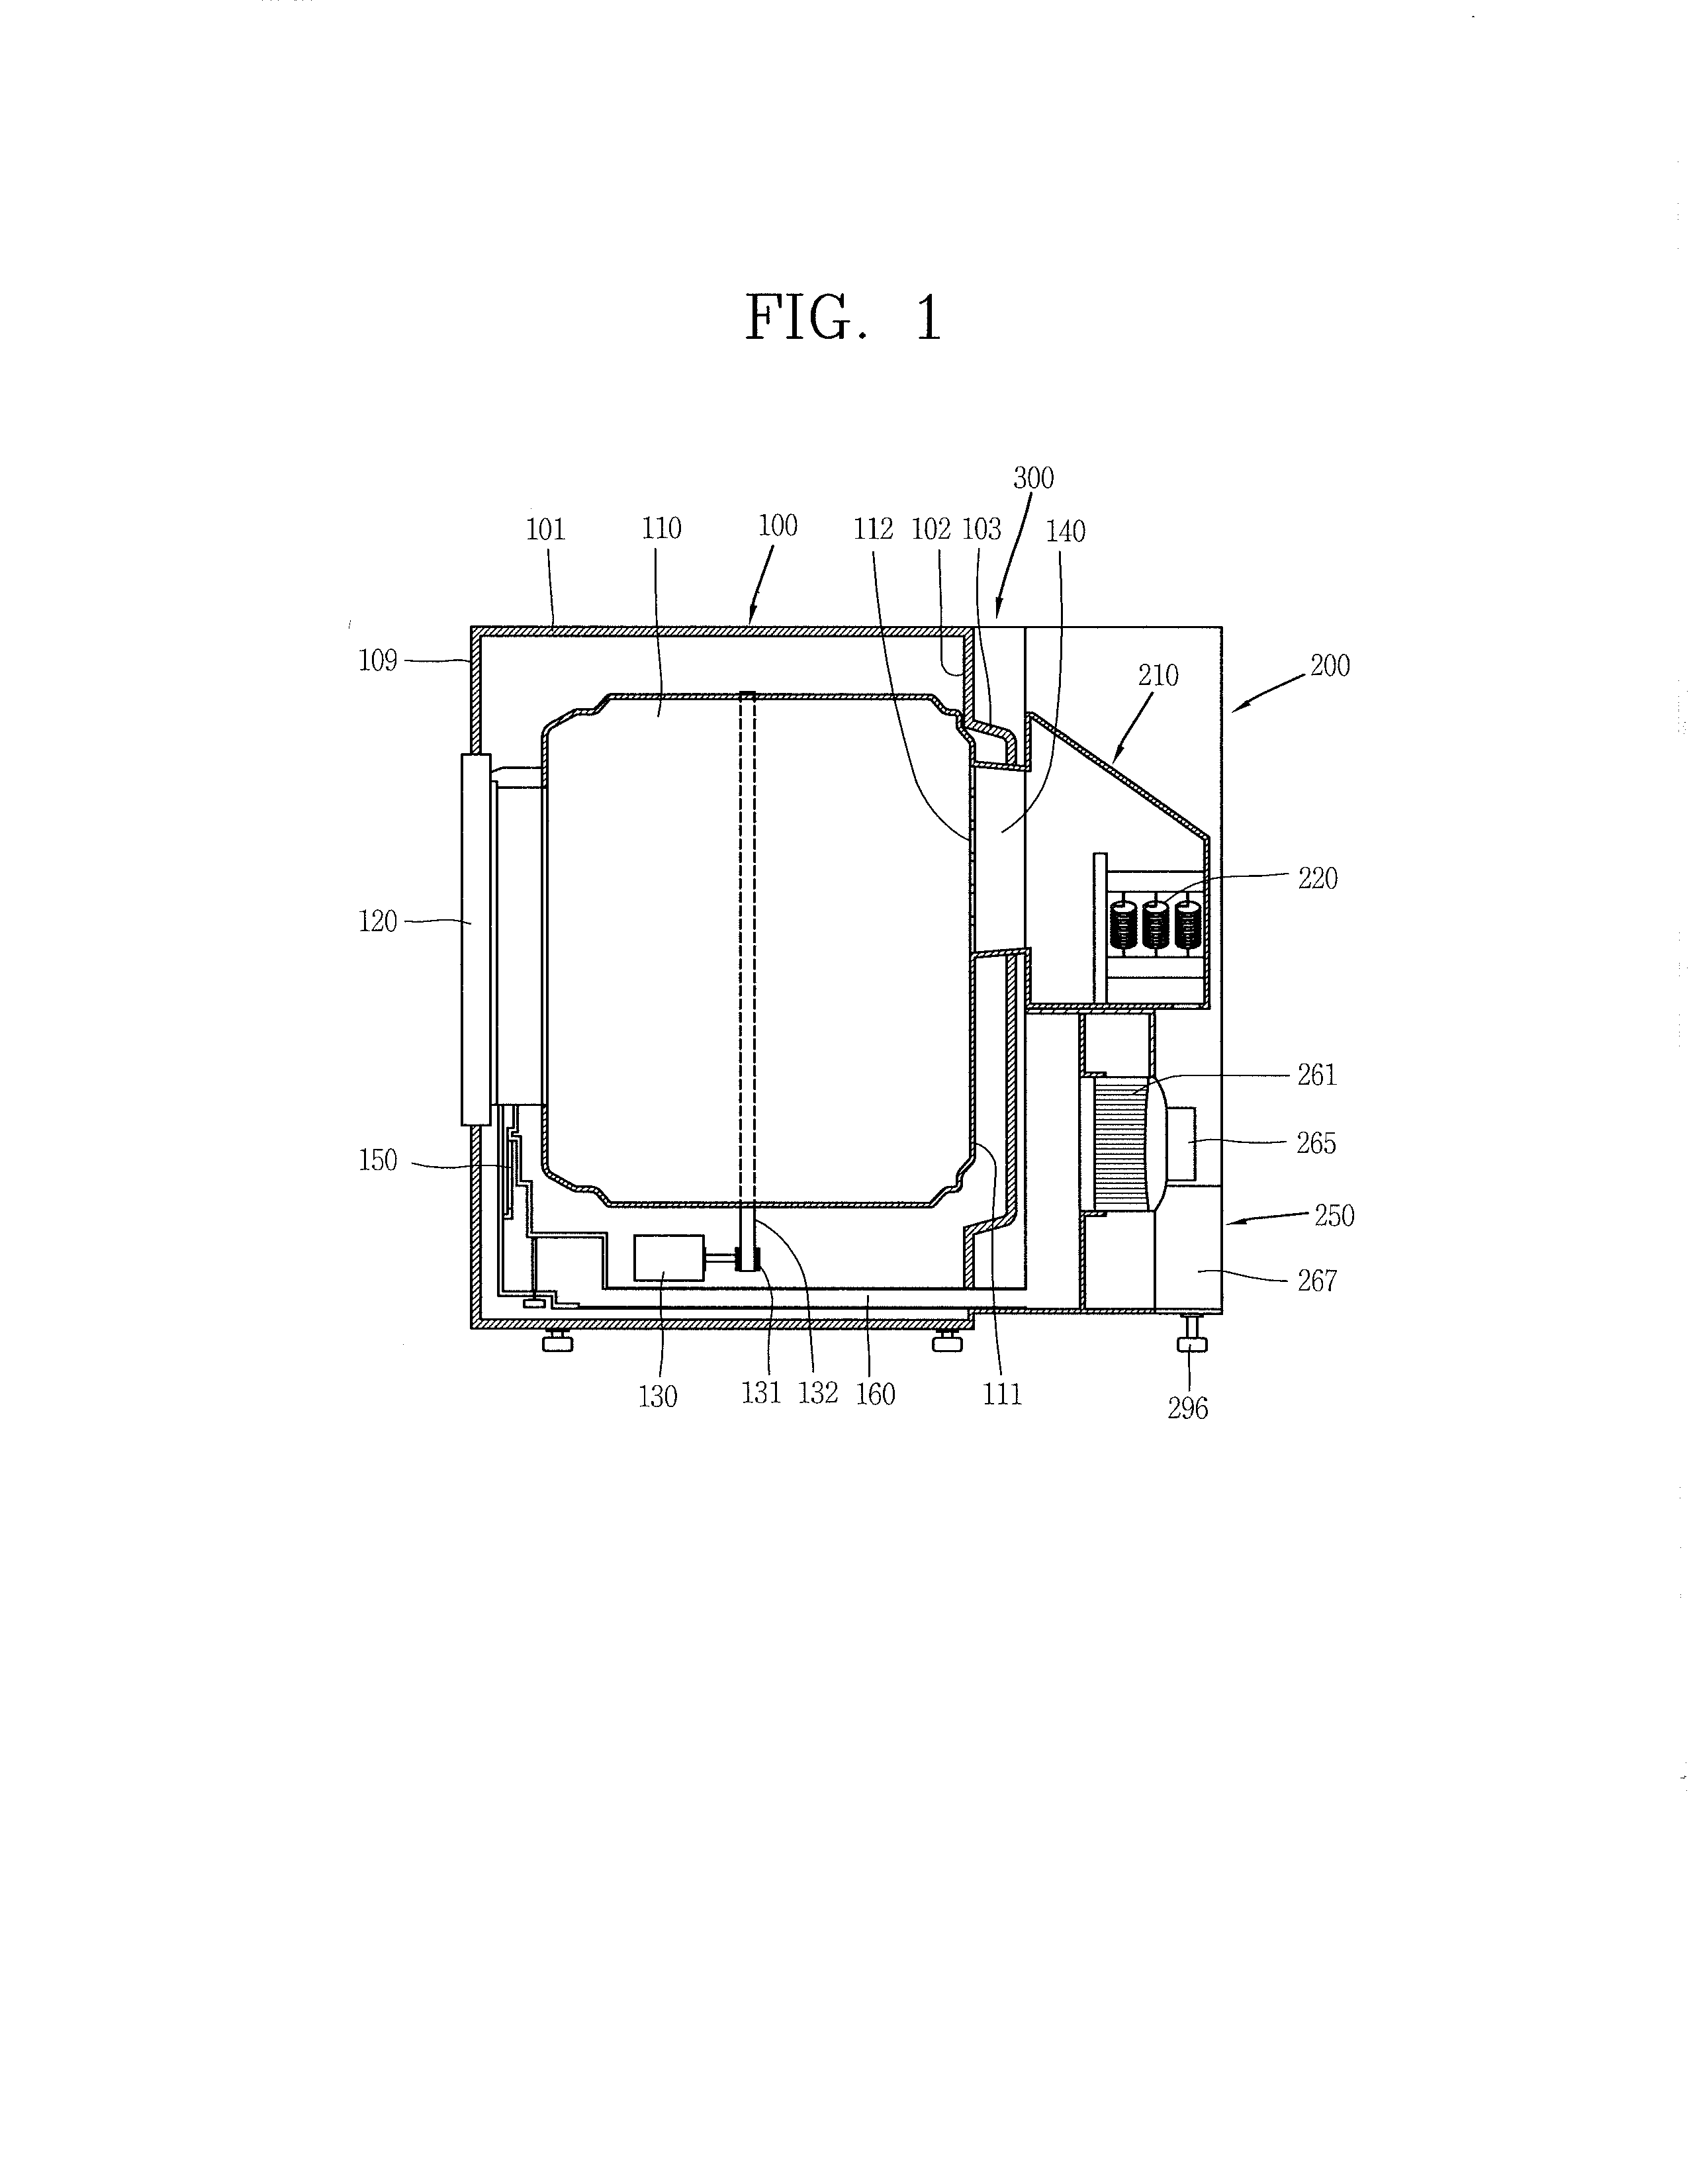 Clothes treating apparatus having drying function